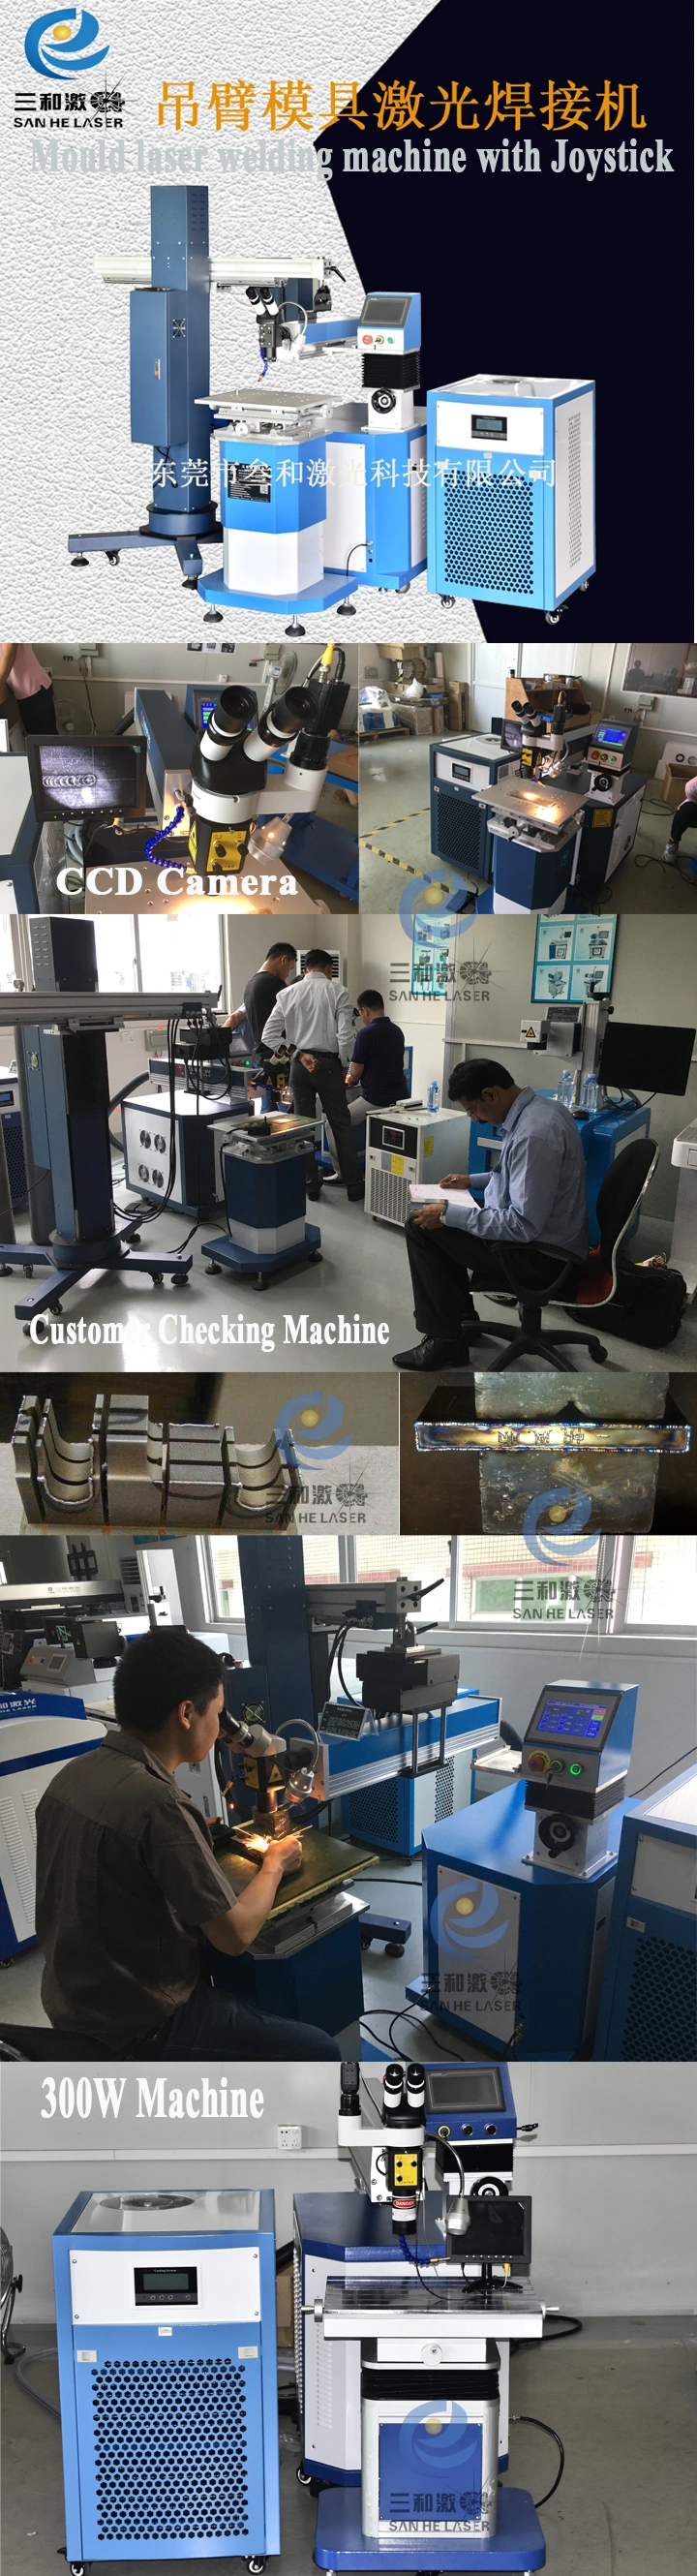 High Precision Laser Welding Machine for Repair Mold Doctor Price